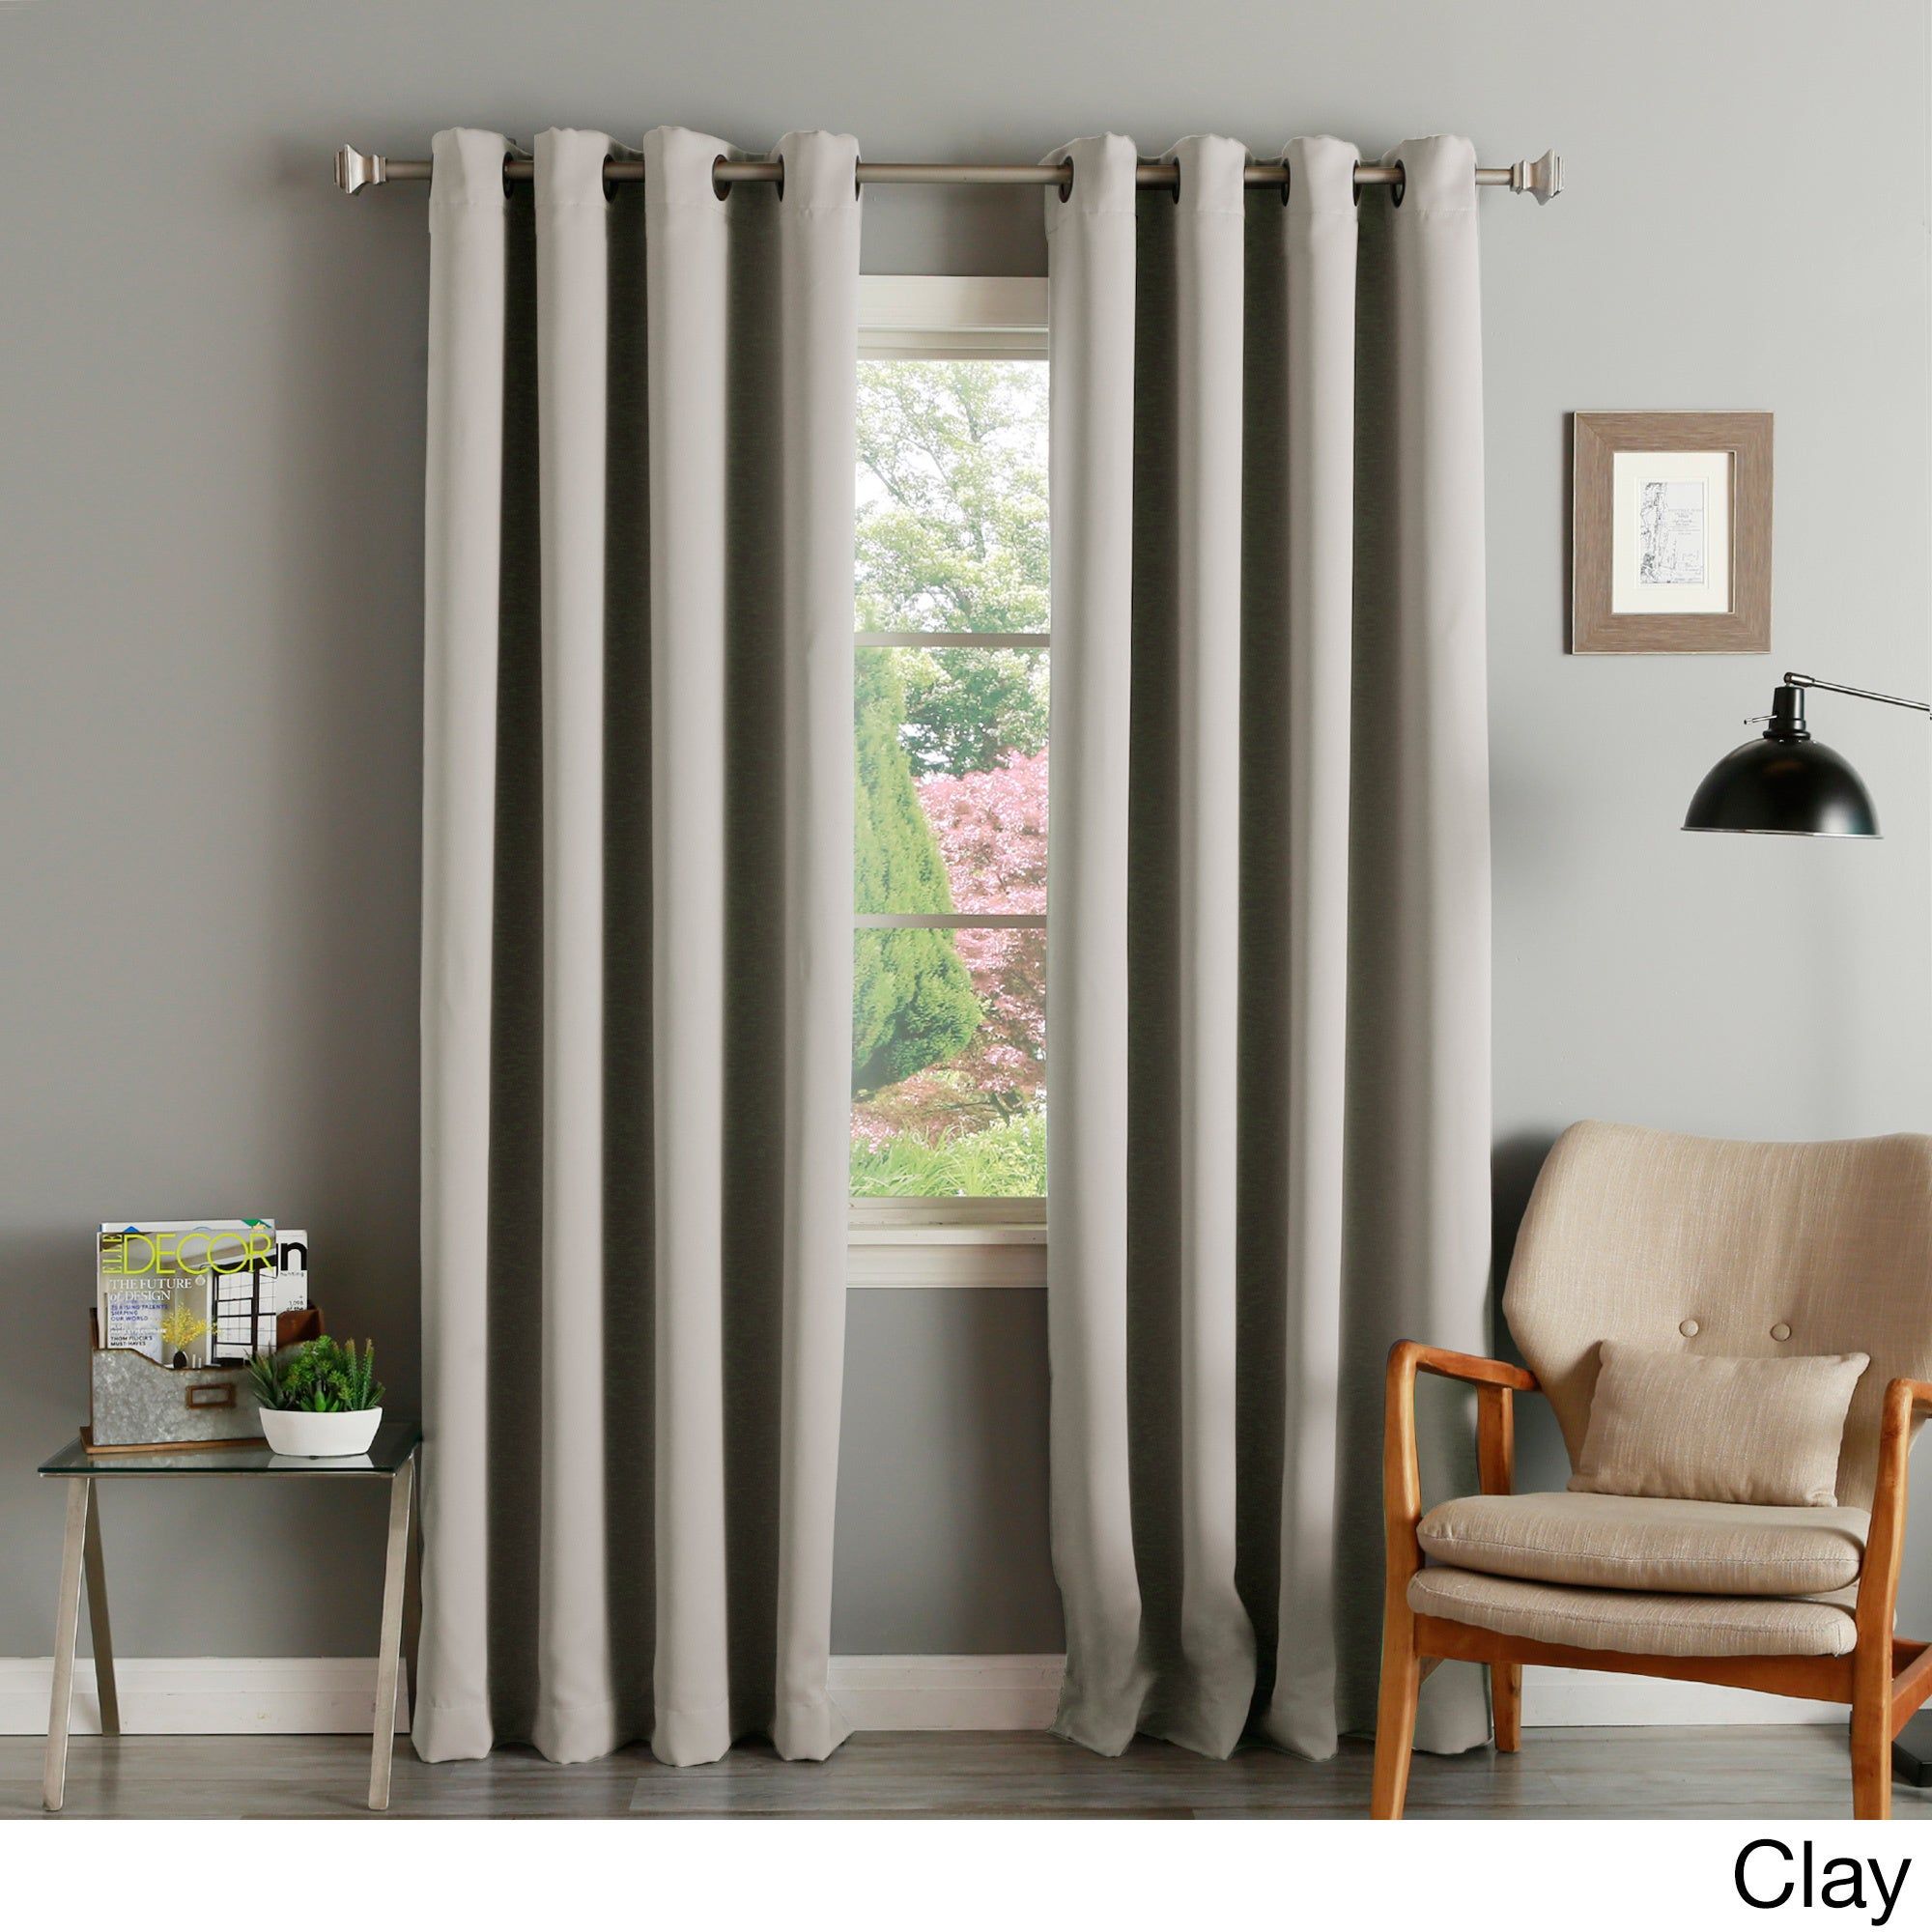 Aurora Home Thermal Insulated Blackout Grommet Top Curtain Panel Pair For Duran Thermal Insulated Blackout Grommet Curtain Panels (View 14 of 20)